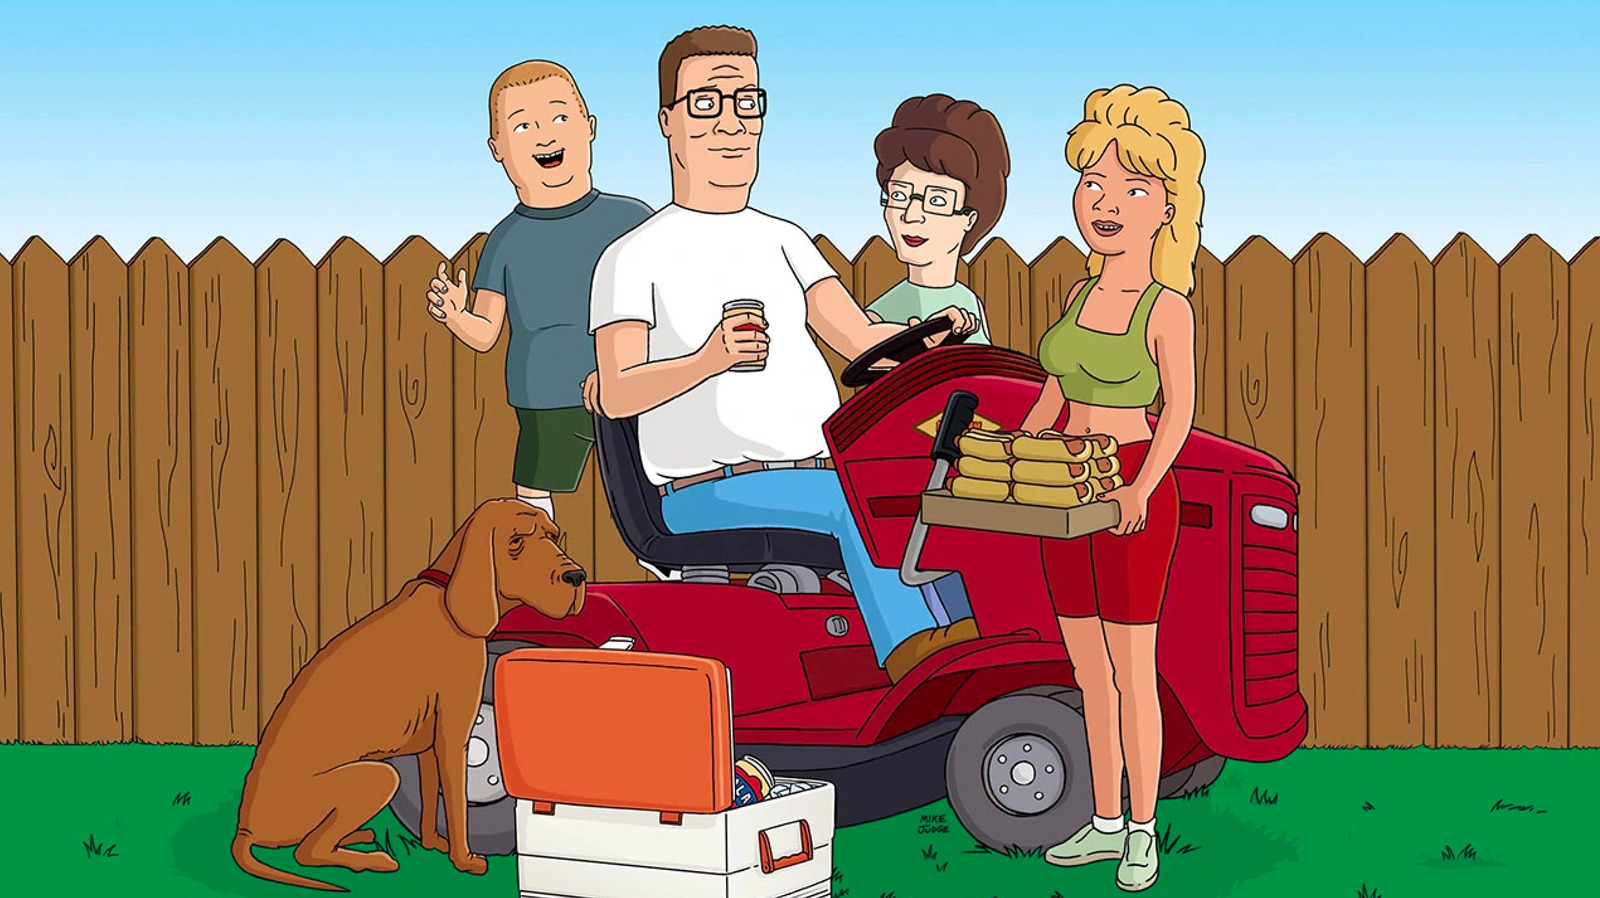 The King Of The Hill Revival Gets The Green Light From Hulu